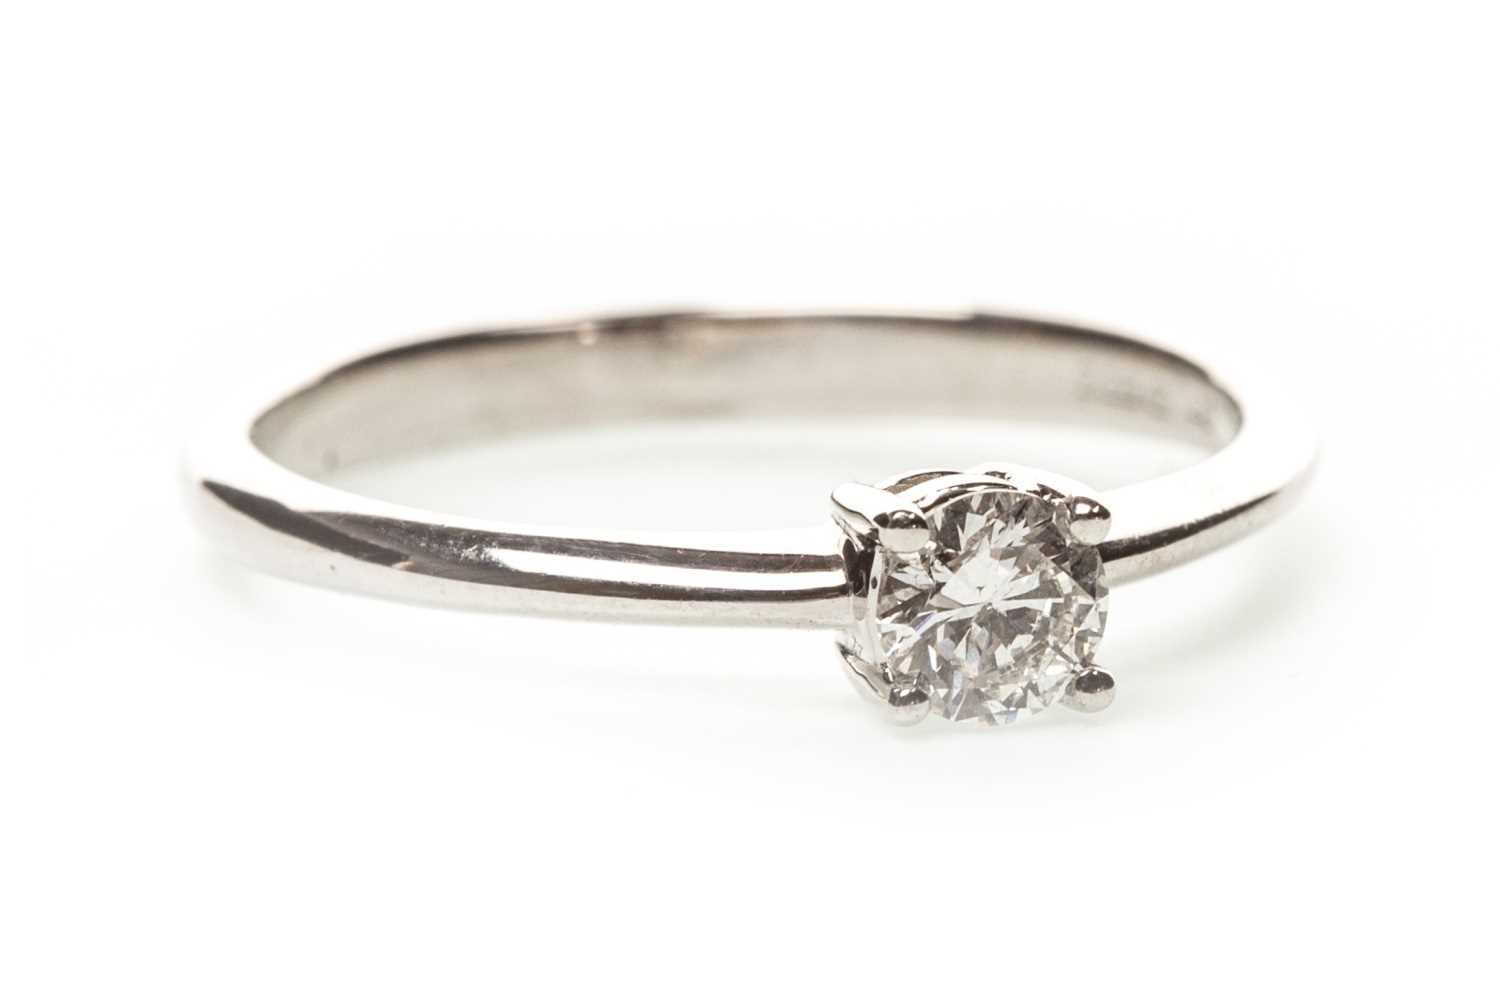 Lot 93 - A DIAMOND SOLITAIRE RING